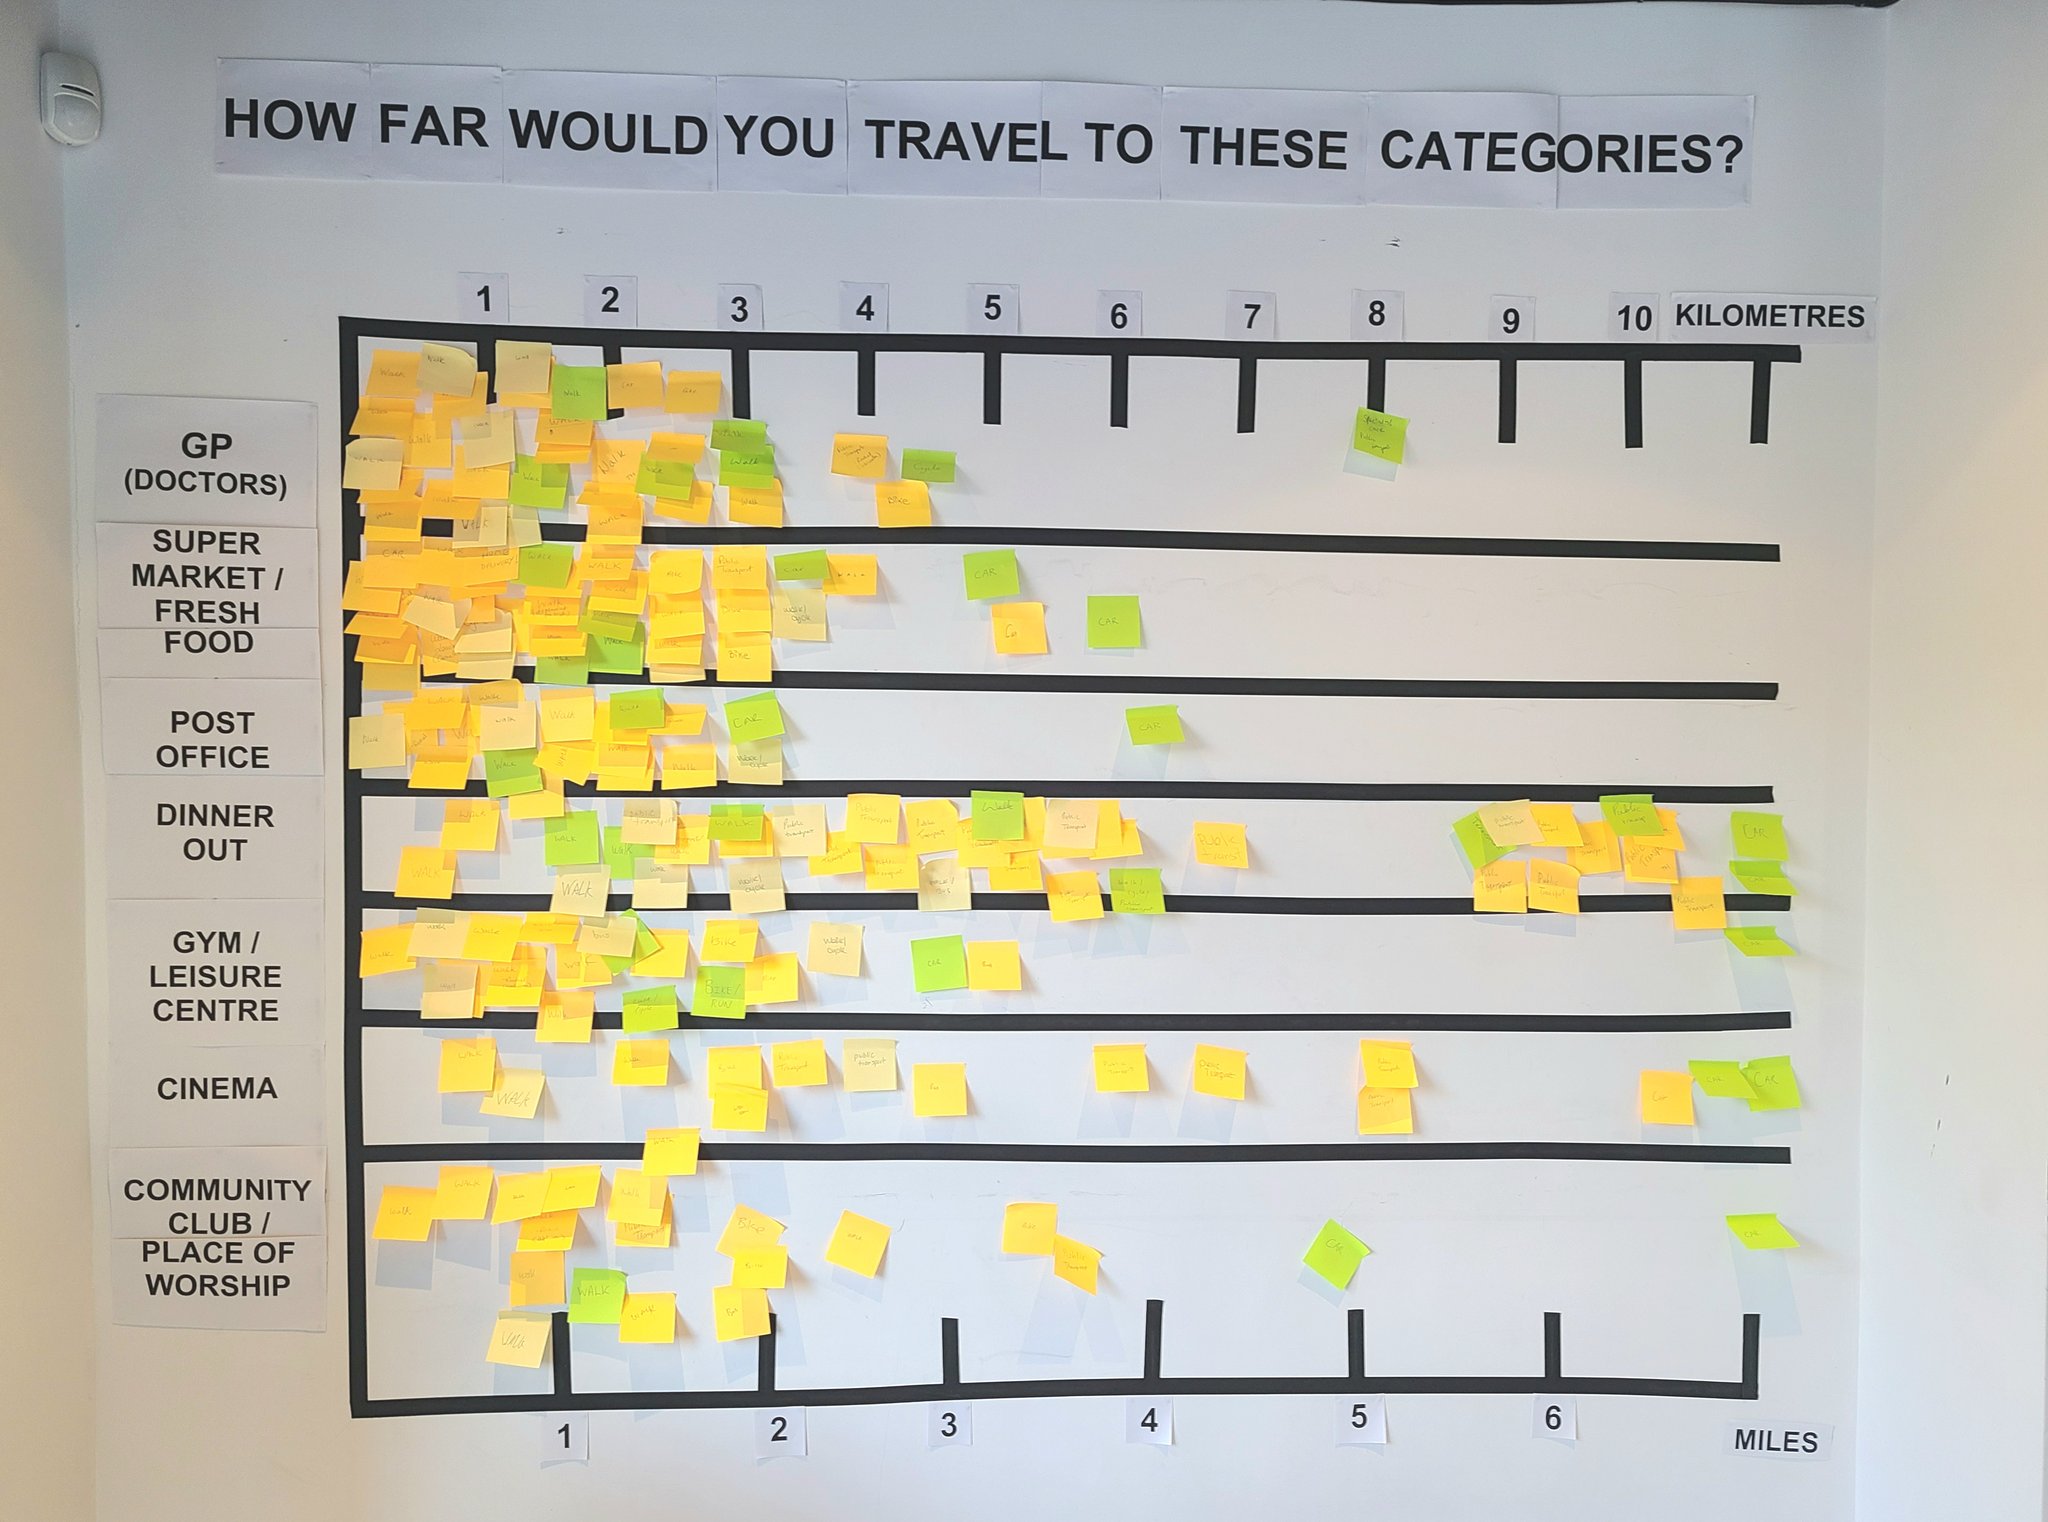 A large chart on a wall. Along the top and bottom are marked distances in km or miles. Along the left are amenities such as GPs, fresh food, cinemas, leisure centres. Yellow stickies are placed according to how far Londoners would travel for those amenities and green stickies for non Londoners. The stickies are clustered to distances within 3km for many categories. People will travel farthest for dinner out and cinemas. They want GPs, fresh food, and post offices locally. 